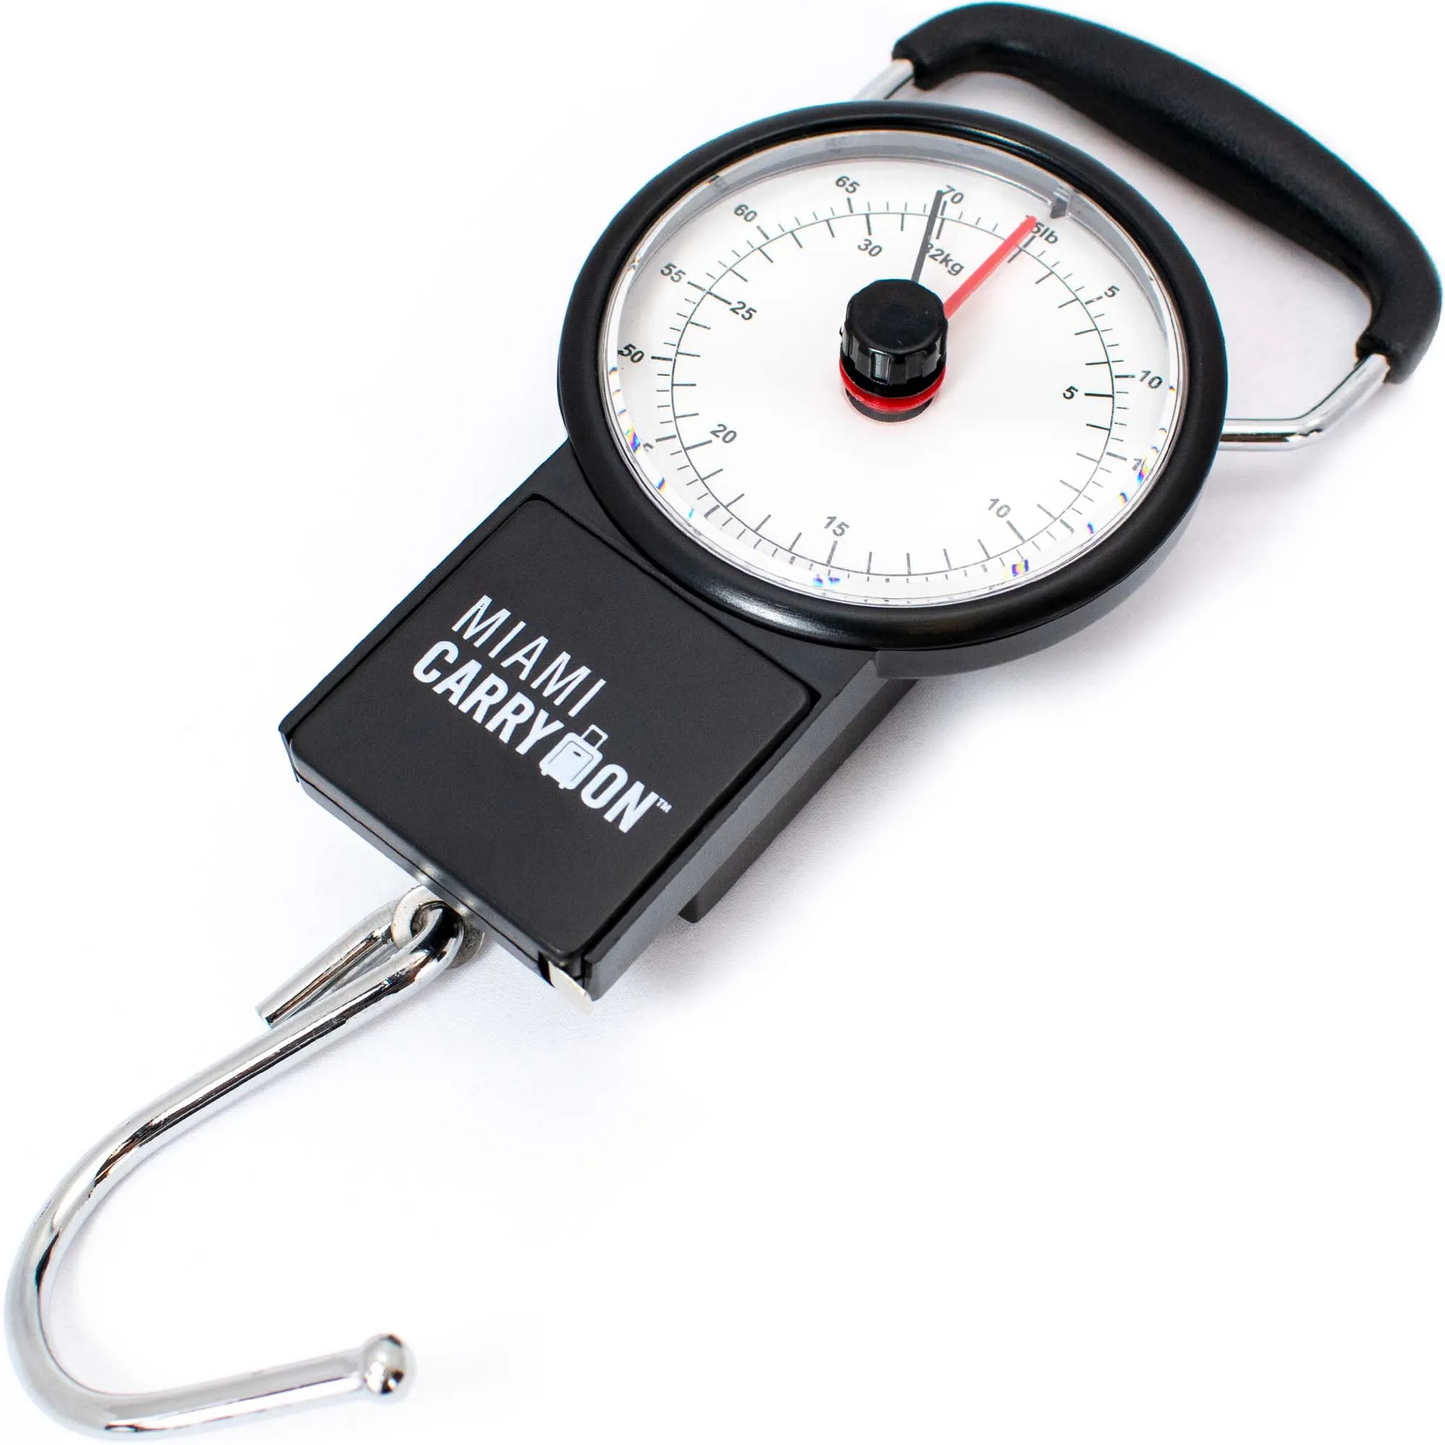 Miami Carry-On Mechanical Luggage Scale 34kg/75lbs